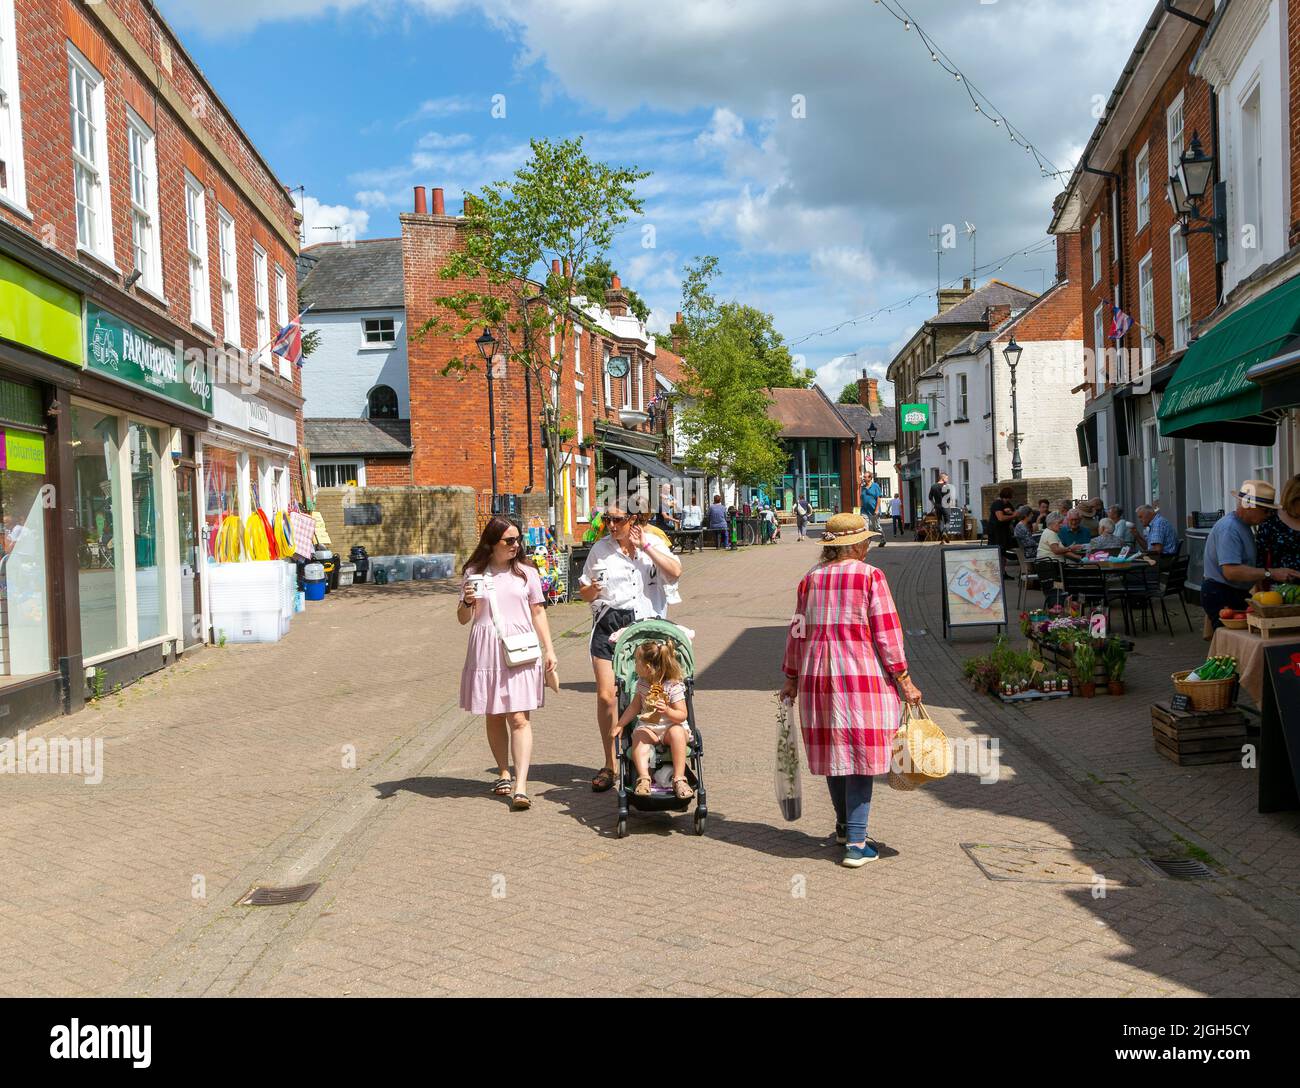 People shopping in pedestrianised street, The Thouroughfare, Halesworth, Suffolk, England, UK Stock Photo